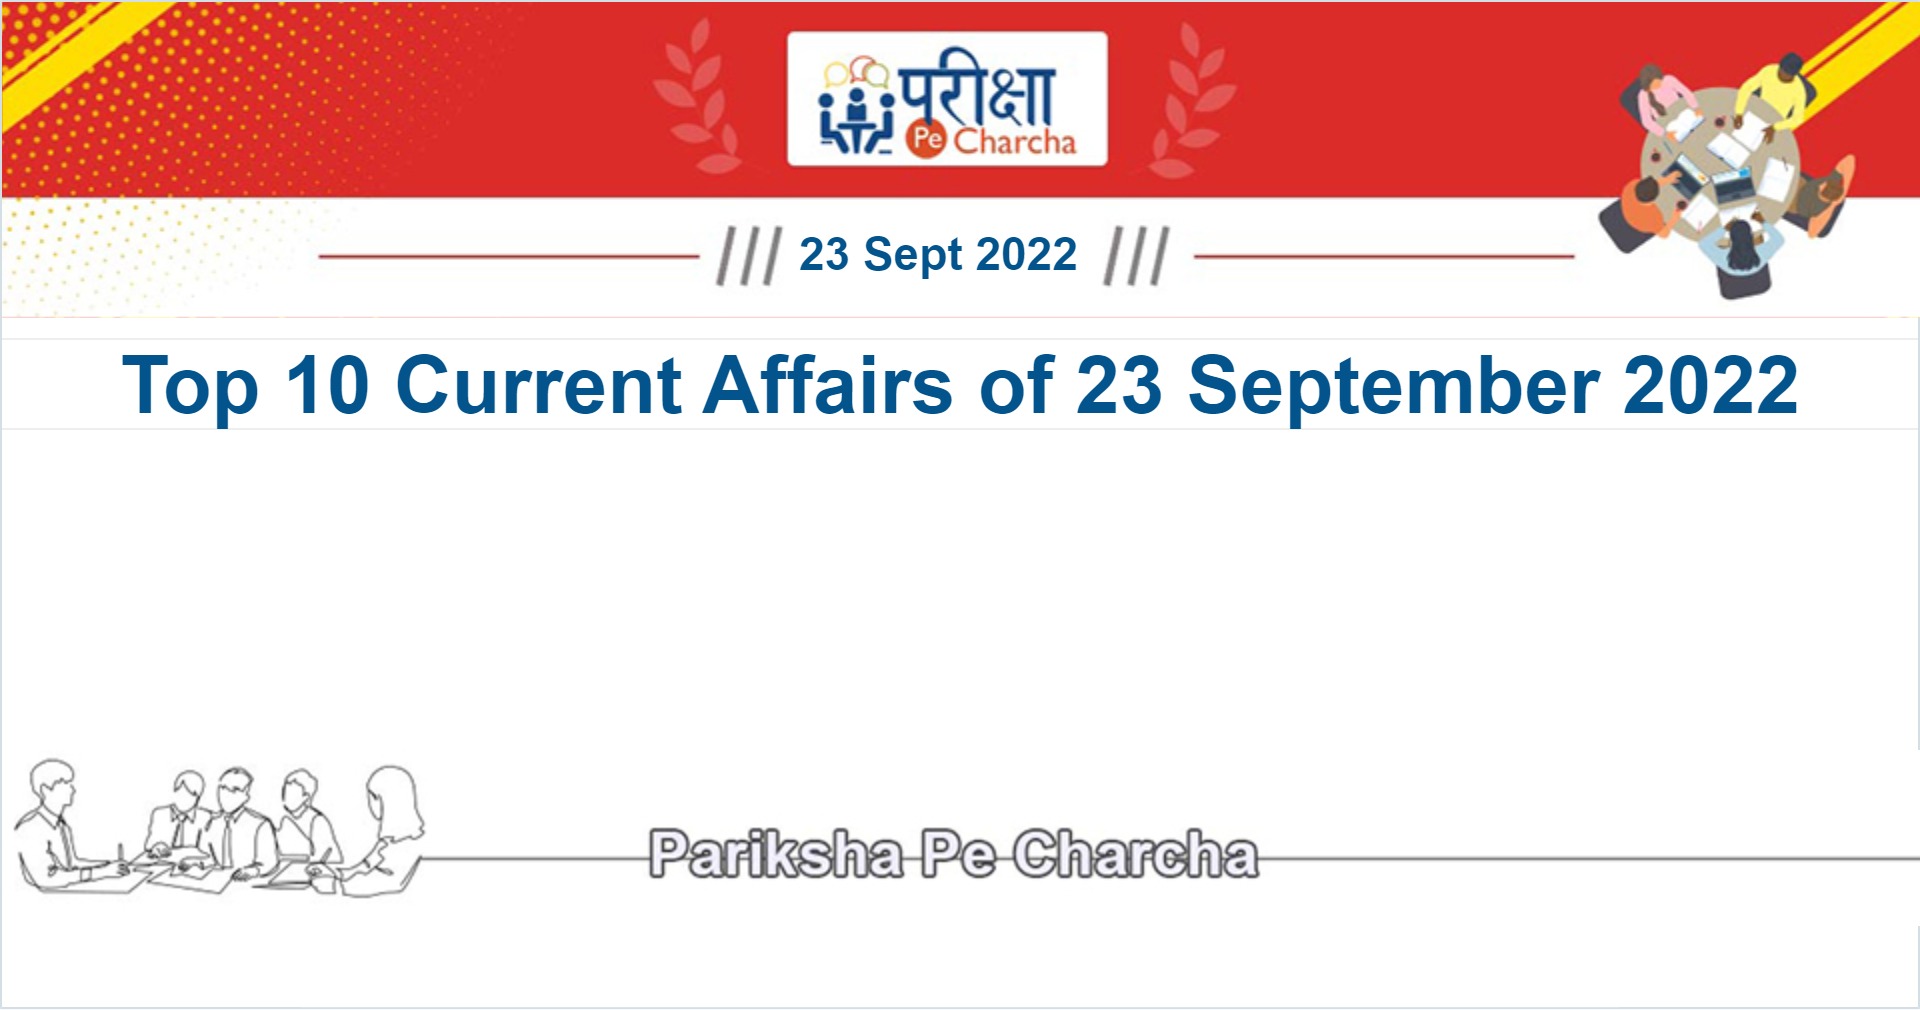 Current Affairs of 23 September 2022 in English and Hindi